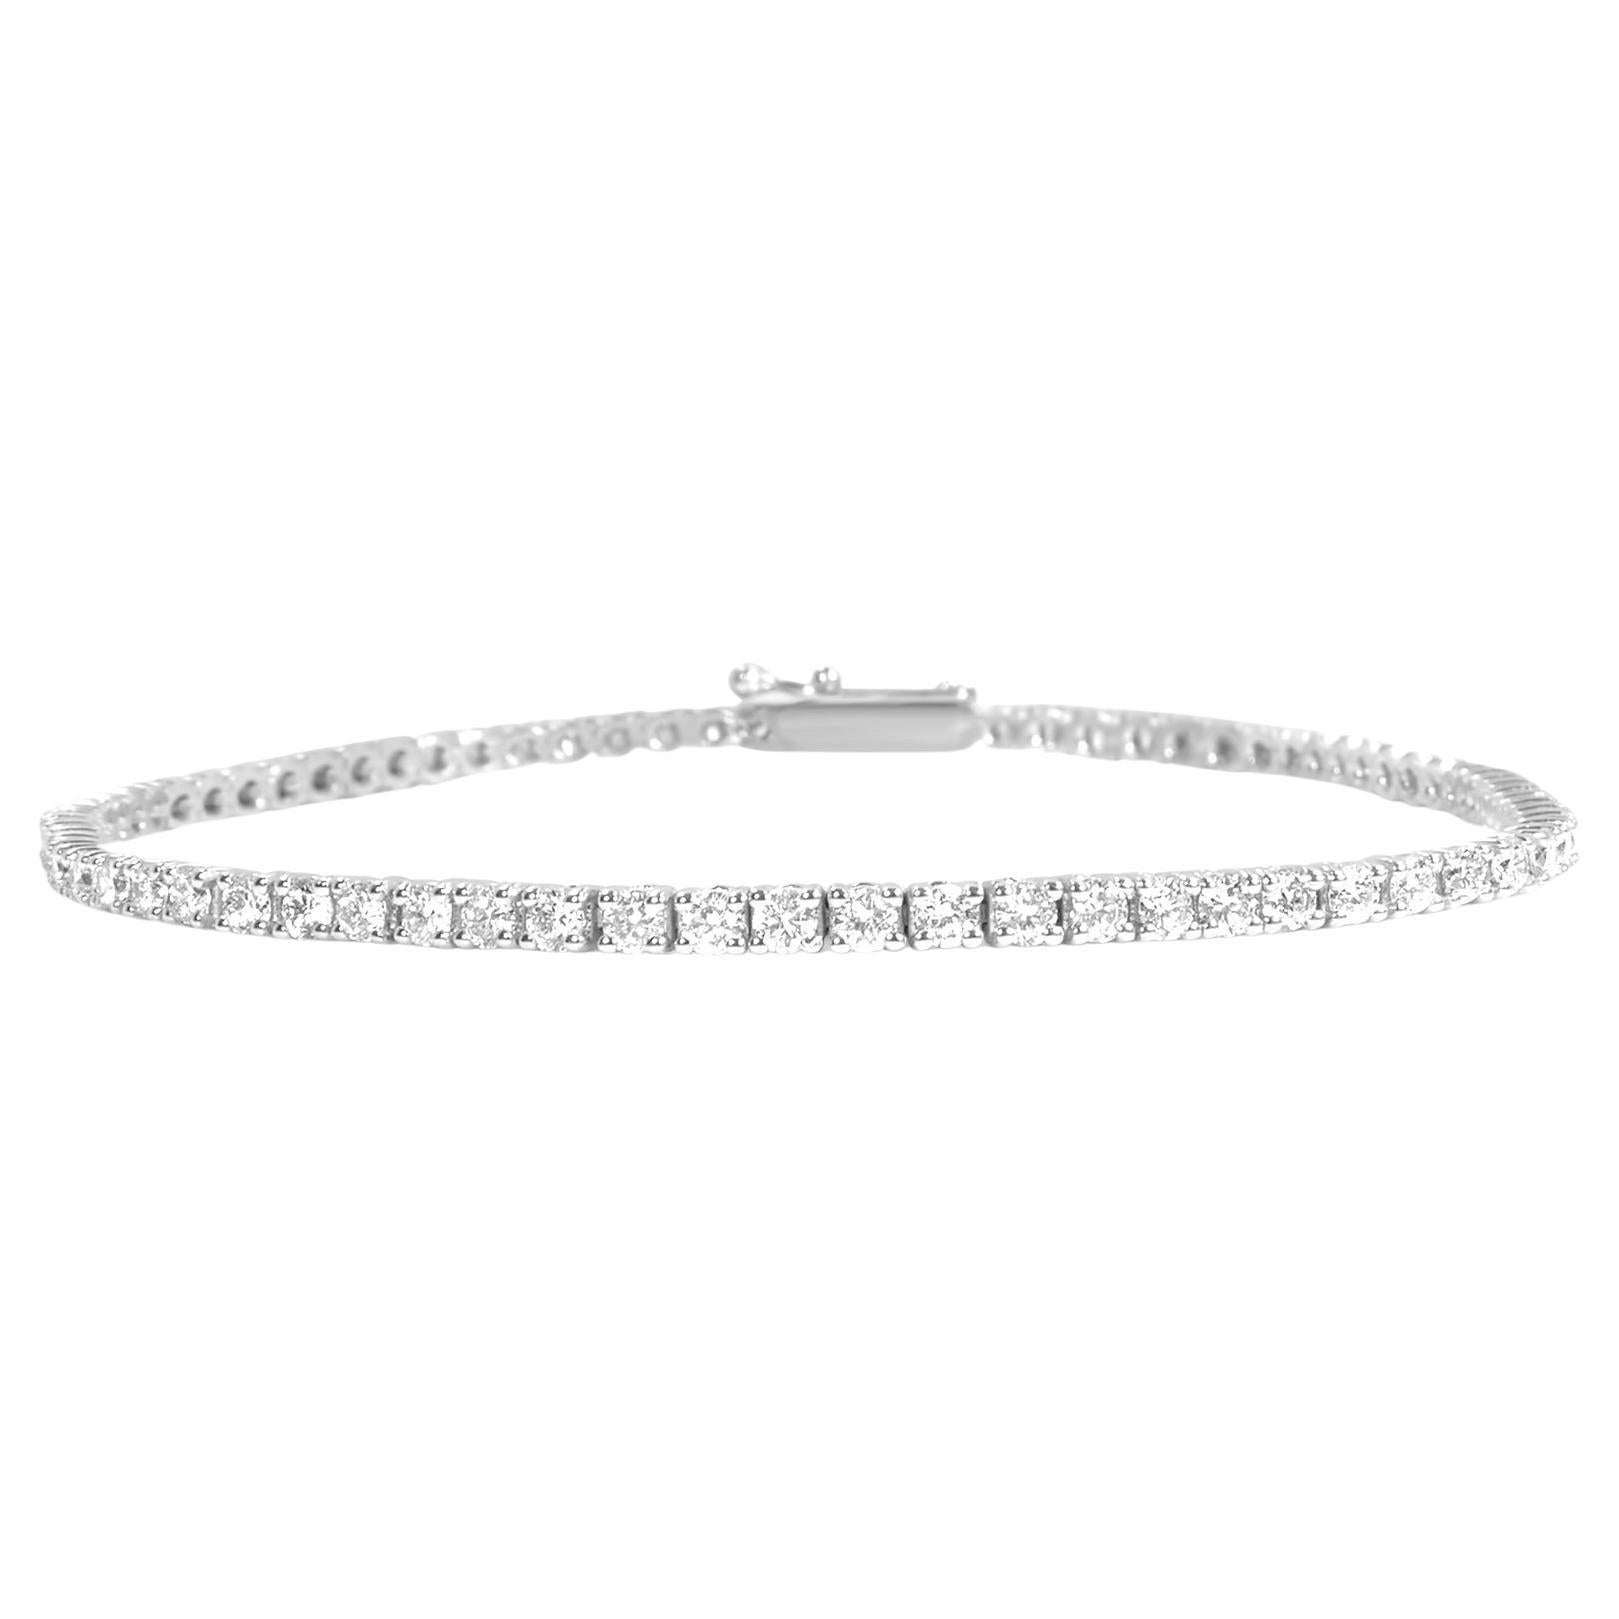 Magnificent diamond tennis bracelet of top quality, 3.89 Carat E to G color and VVS1-VVS2 clarity. 
A truly one of a kind masterpiece!

Side Stones:
___________
Natural Diamonds
Cut: Round Brilliant
Carat: 3.89 tcw / 68 stones
Color: E to G
Clarity: